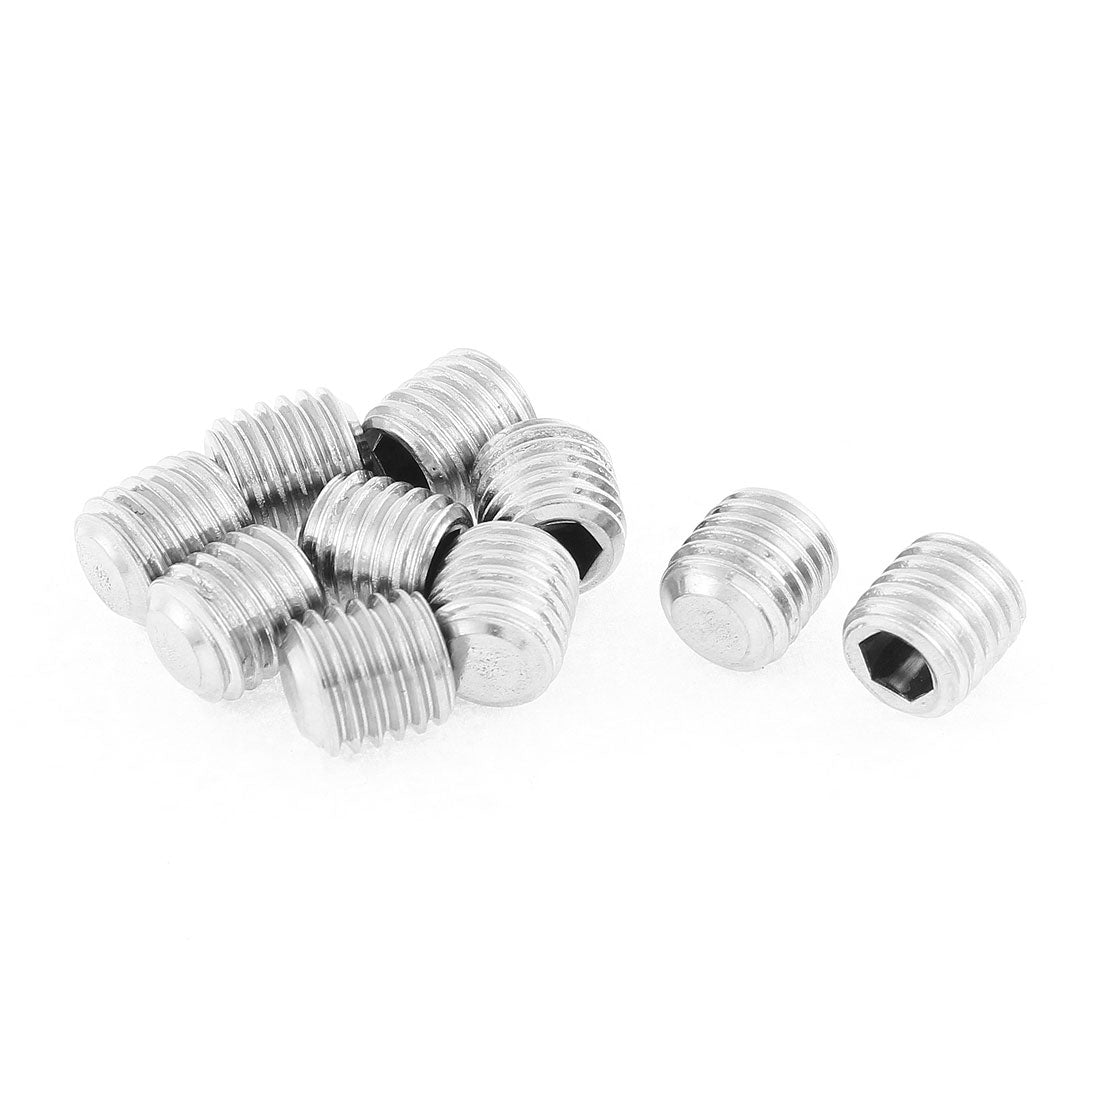 uxcell Uxcell M12x12mm 1.75mm Pitch Stainless Steel Hex Socket Set Flat Point Grub Screws 10pcs